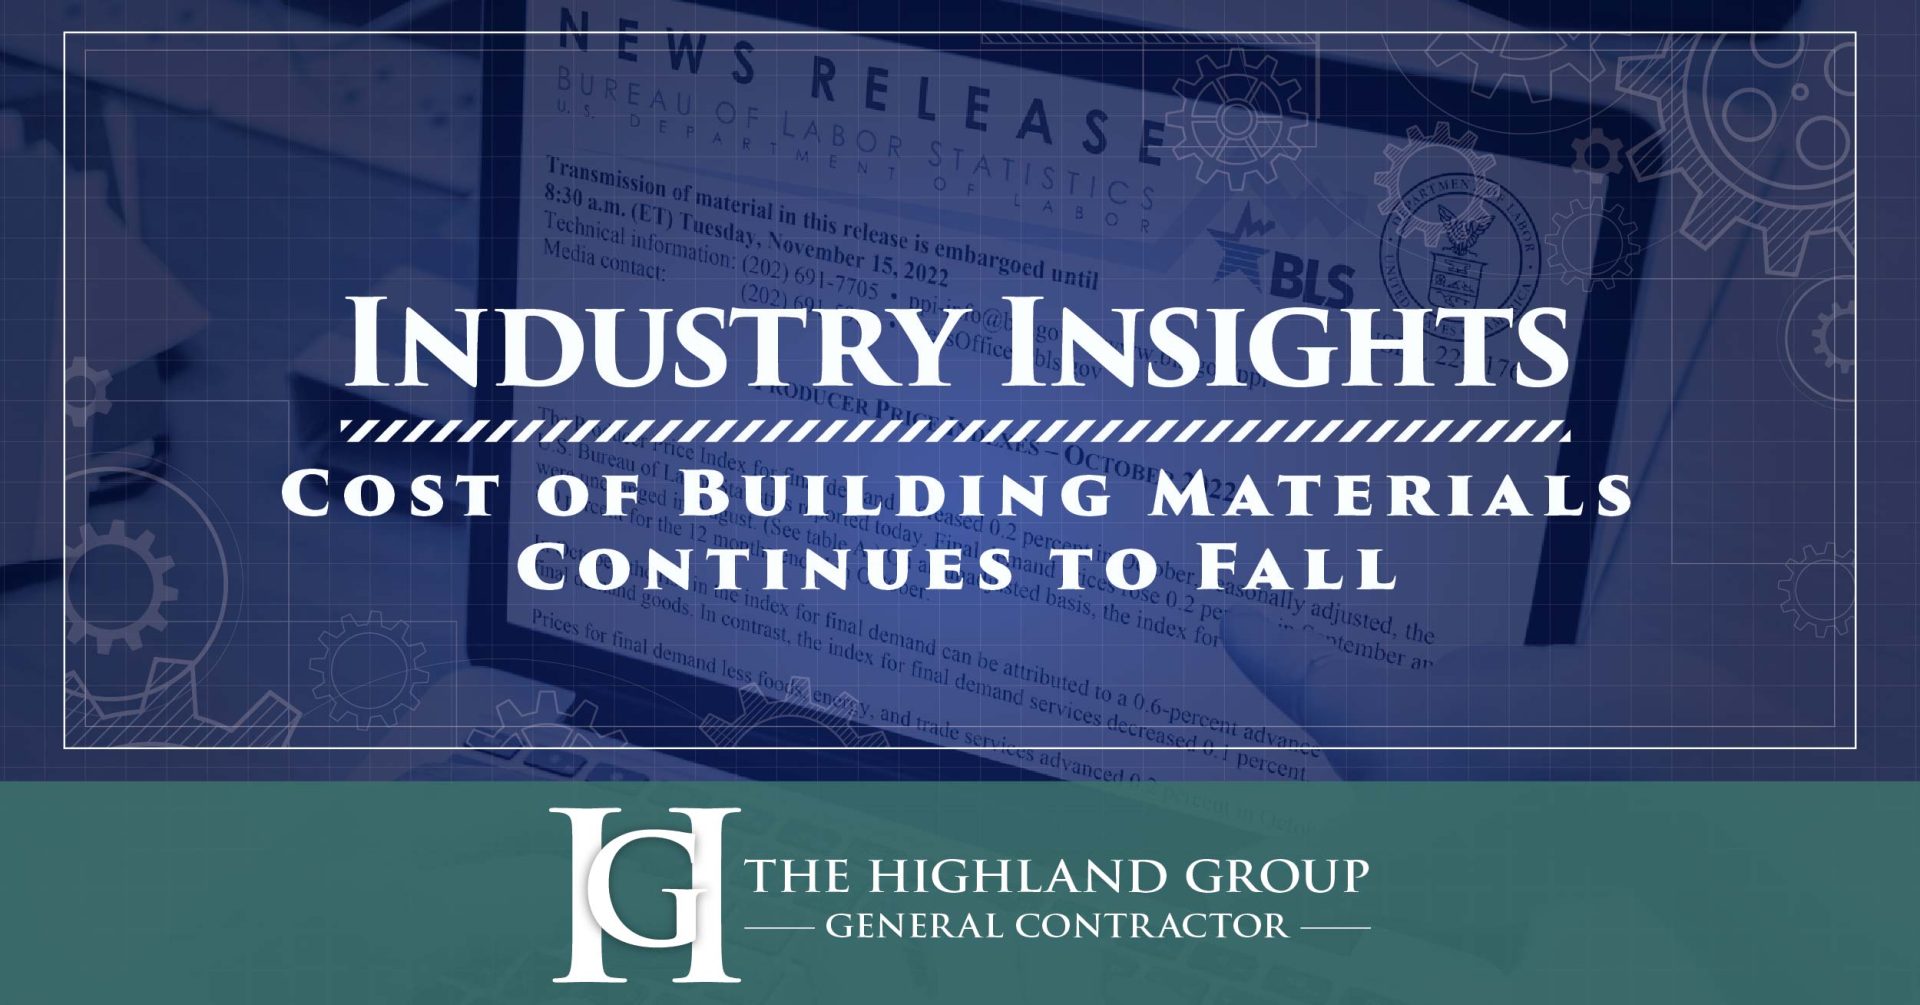 Report Shows the Price of Building Materials is Continuing to Fall Going Into 2023